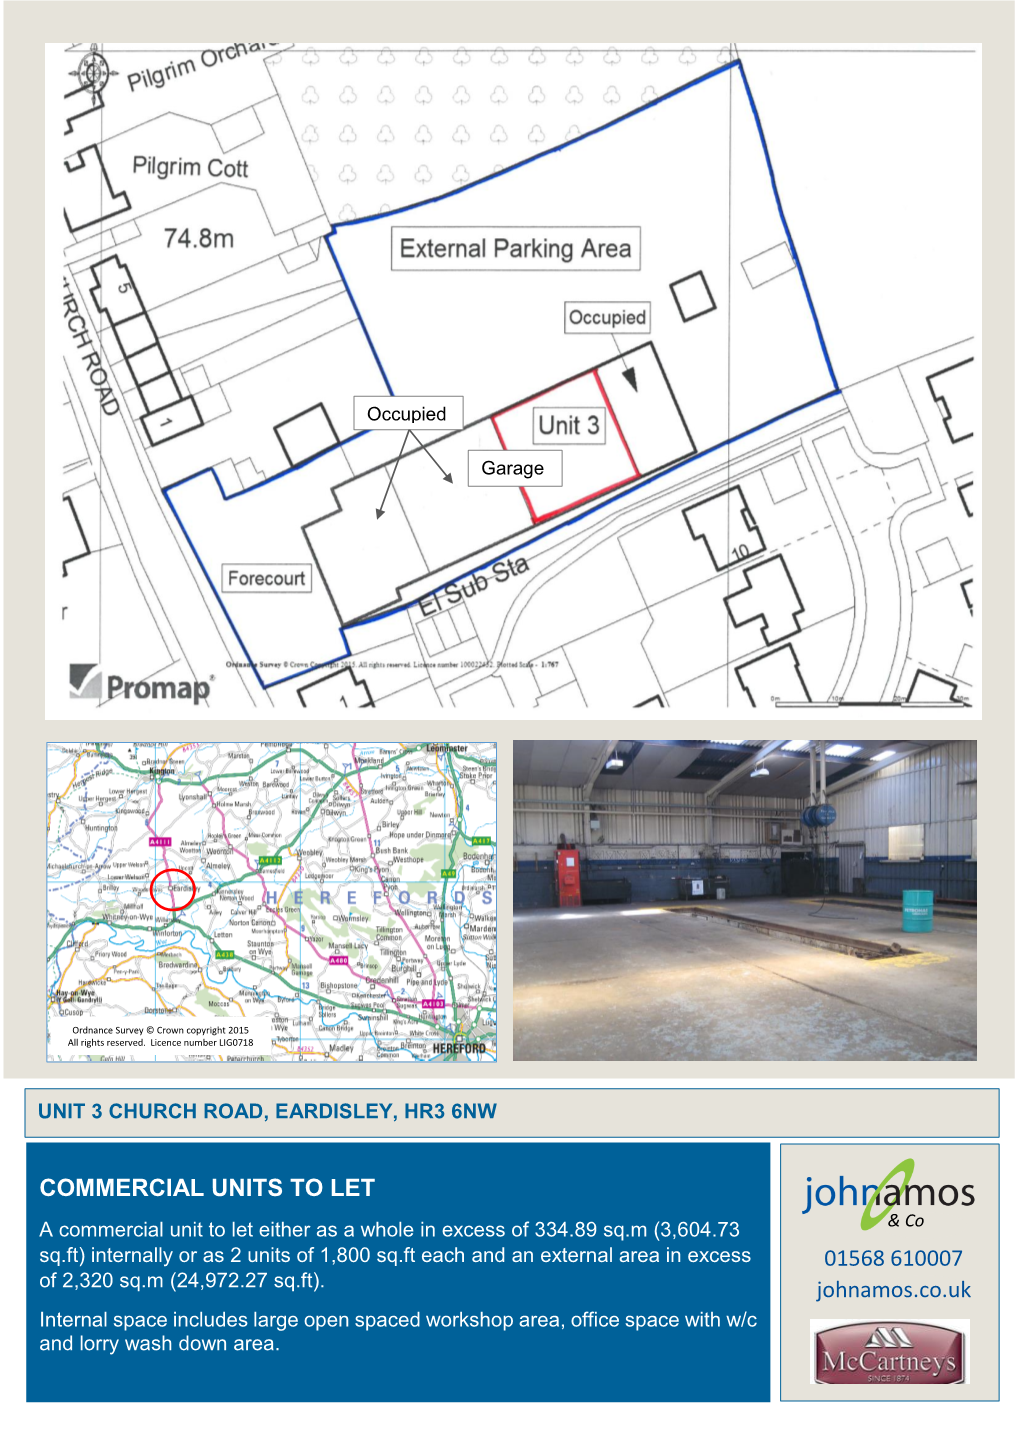 COMMERCIAL UNITS to LET 01568 610007 Johnamos.Co.Uk